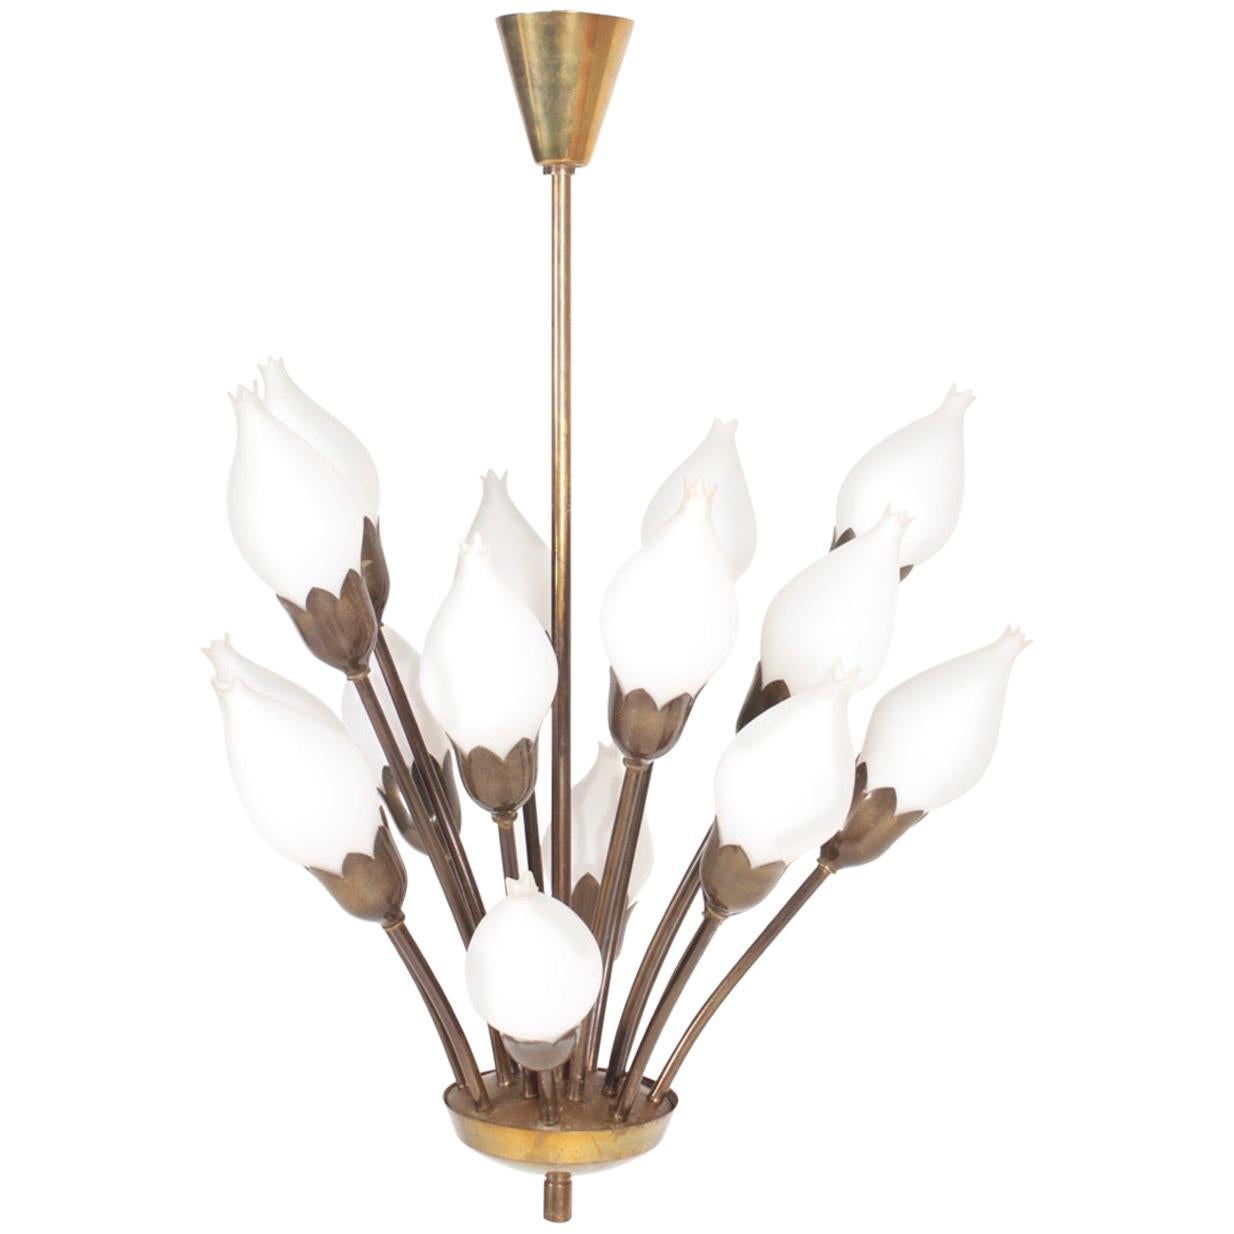 Danish Midcentury Tulip Chandelier in Brass and Glass by Fog & Mørup, 1950s